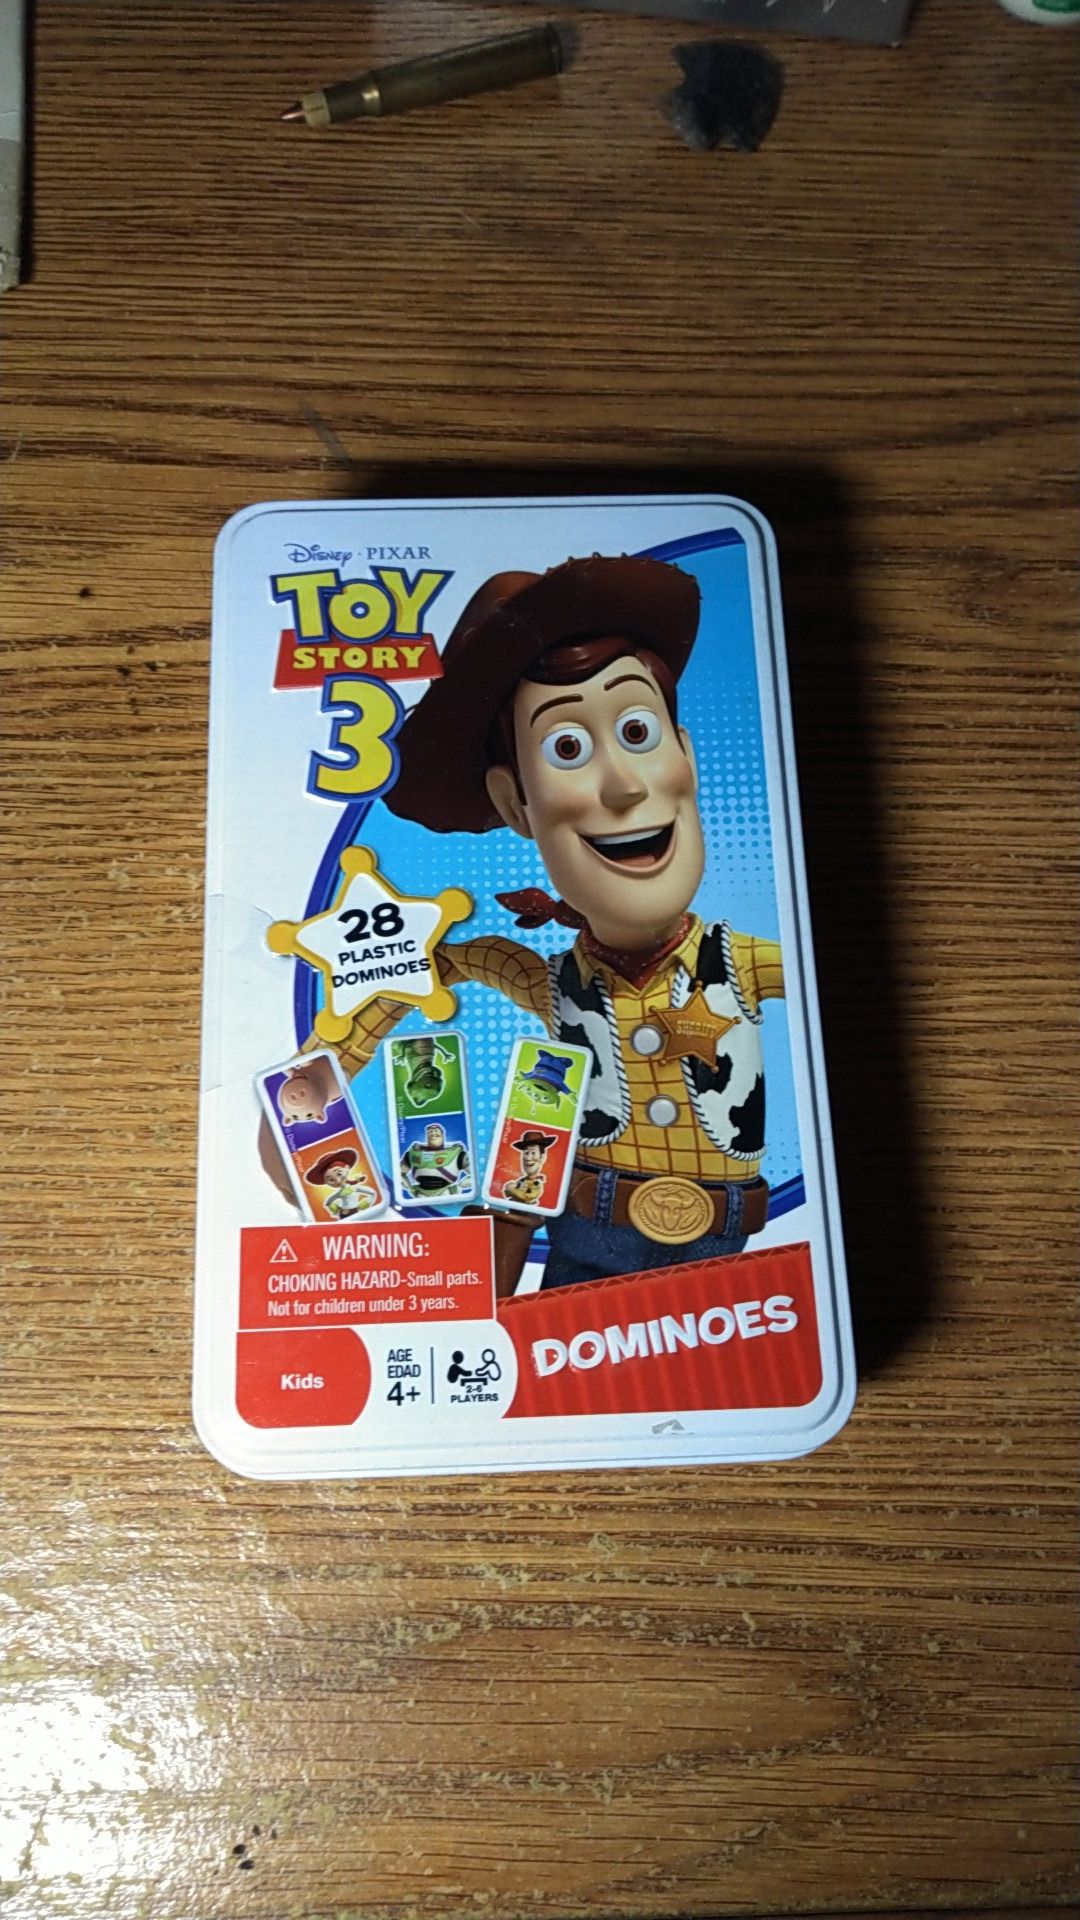 Collectable toy story 3 dominos set. All 28 pieces are there(complete set) in very good condition.